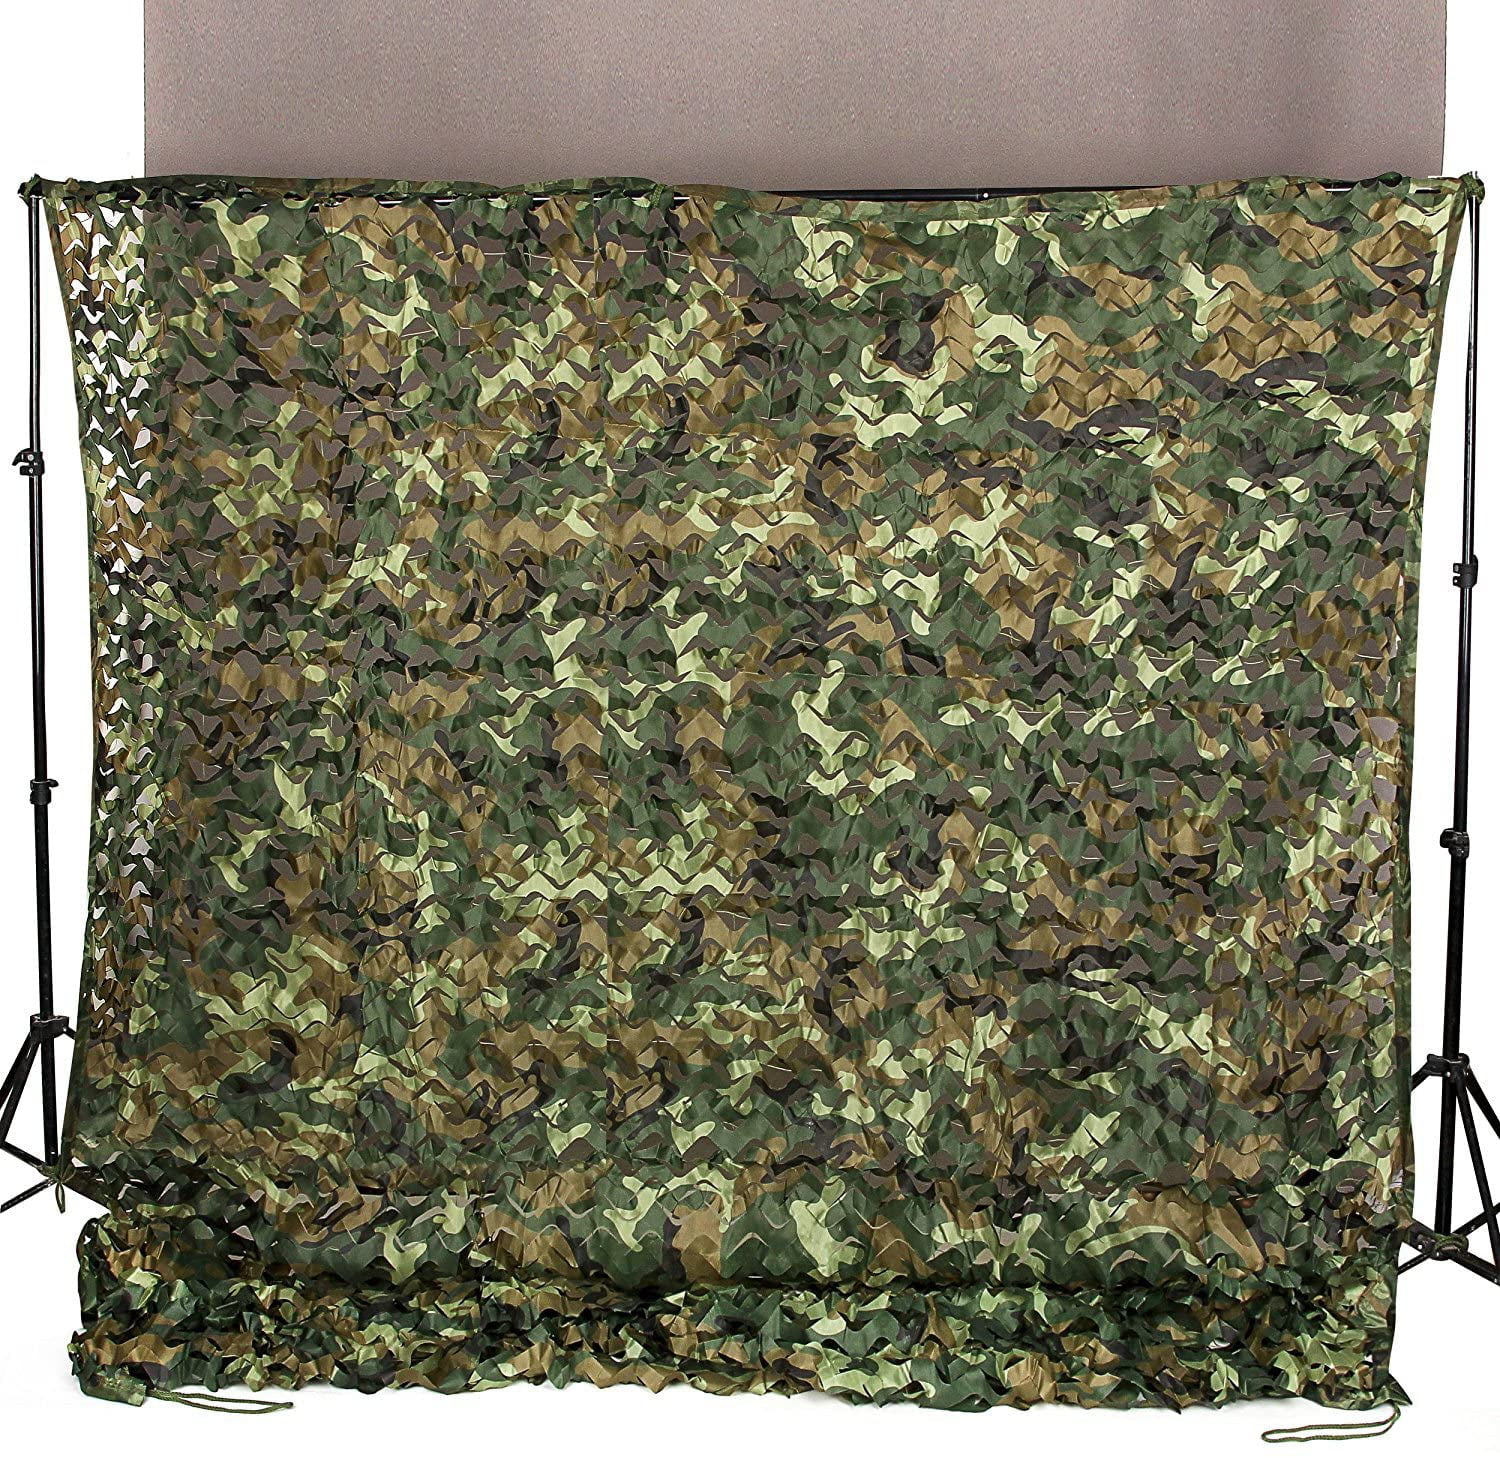 Camouflage Camo Net Netting Hide Hunting Military Army Woodland Camp 